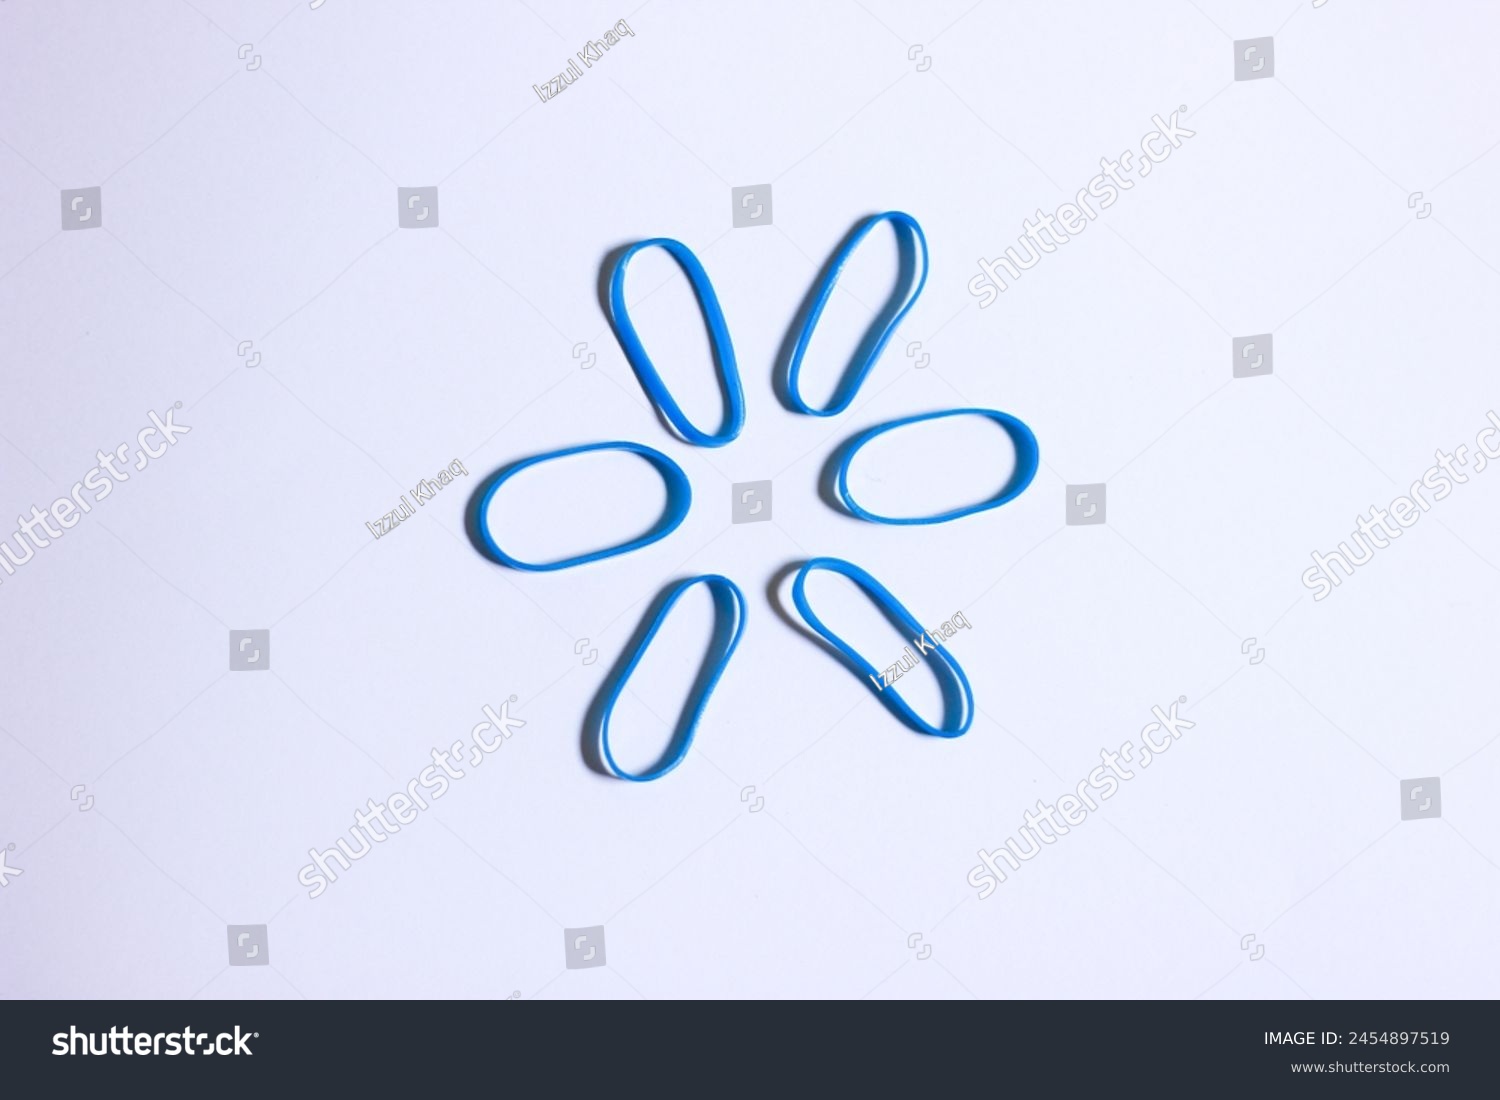 blue vibrant colored mini rubber band isolated on white background forming a hexagon shape look alike, conceptual photo illustration #2454897519